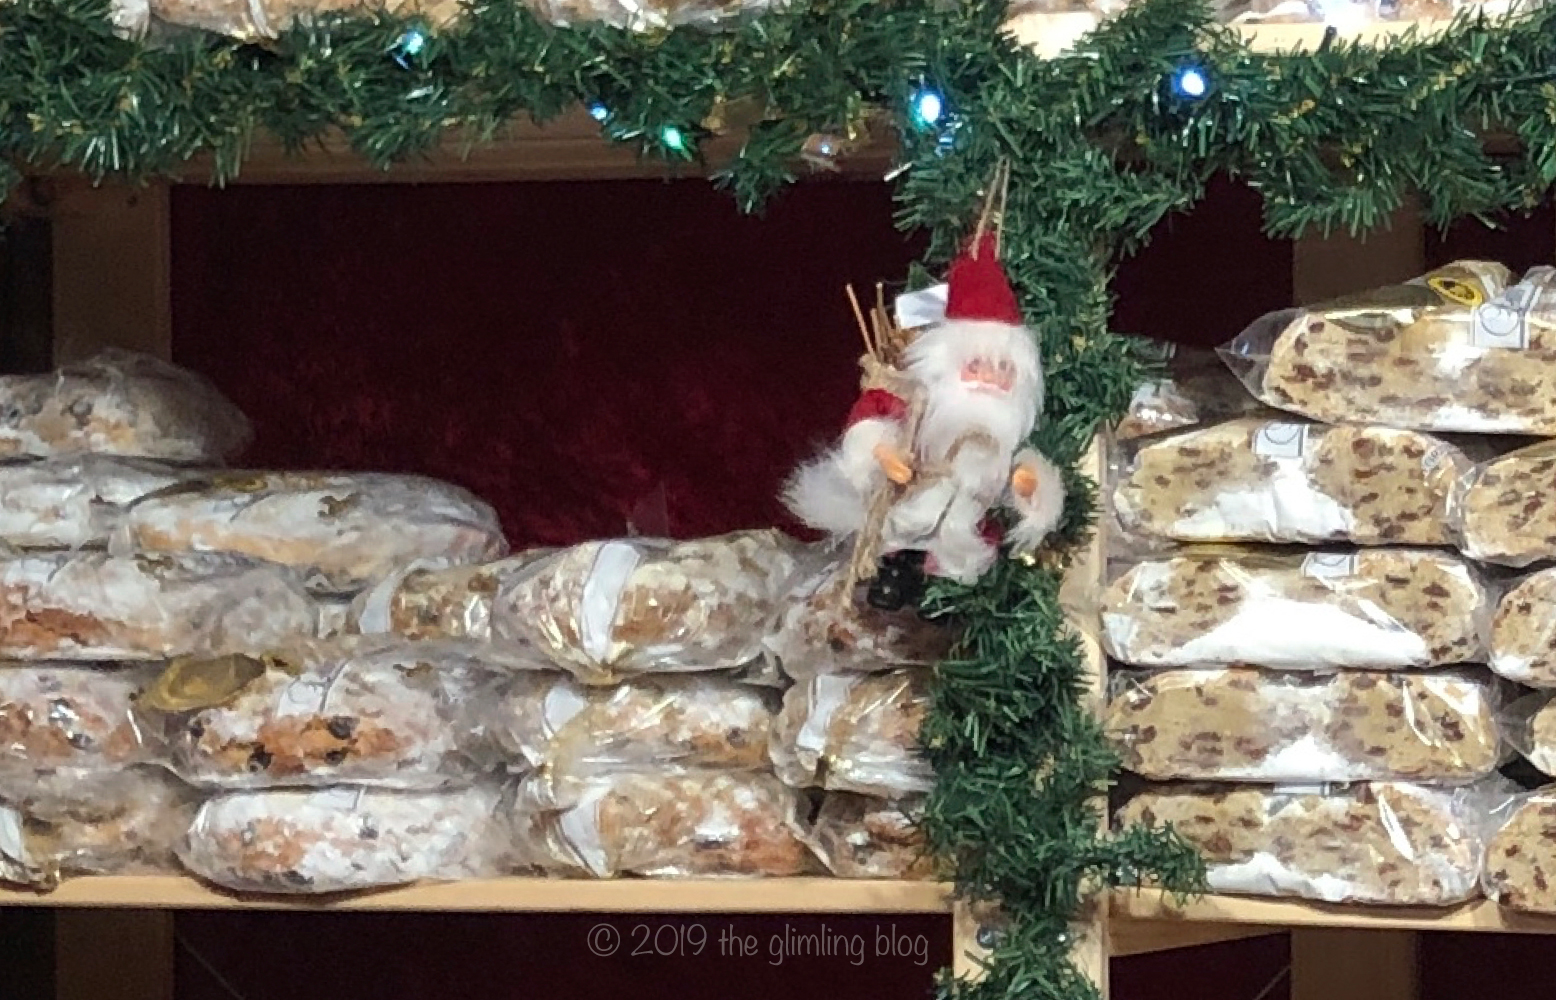 Christmas stollen from bakery Eckert in Dresden at the Christmas market by the red town hall (Rotes Rathaus) in Berlin.